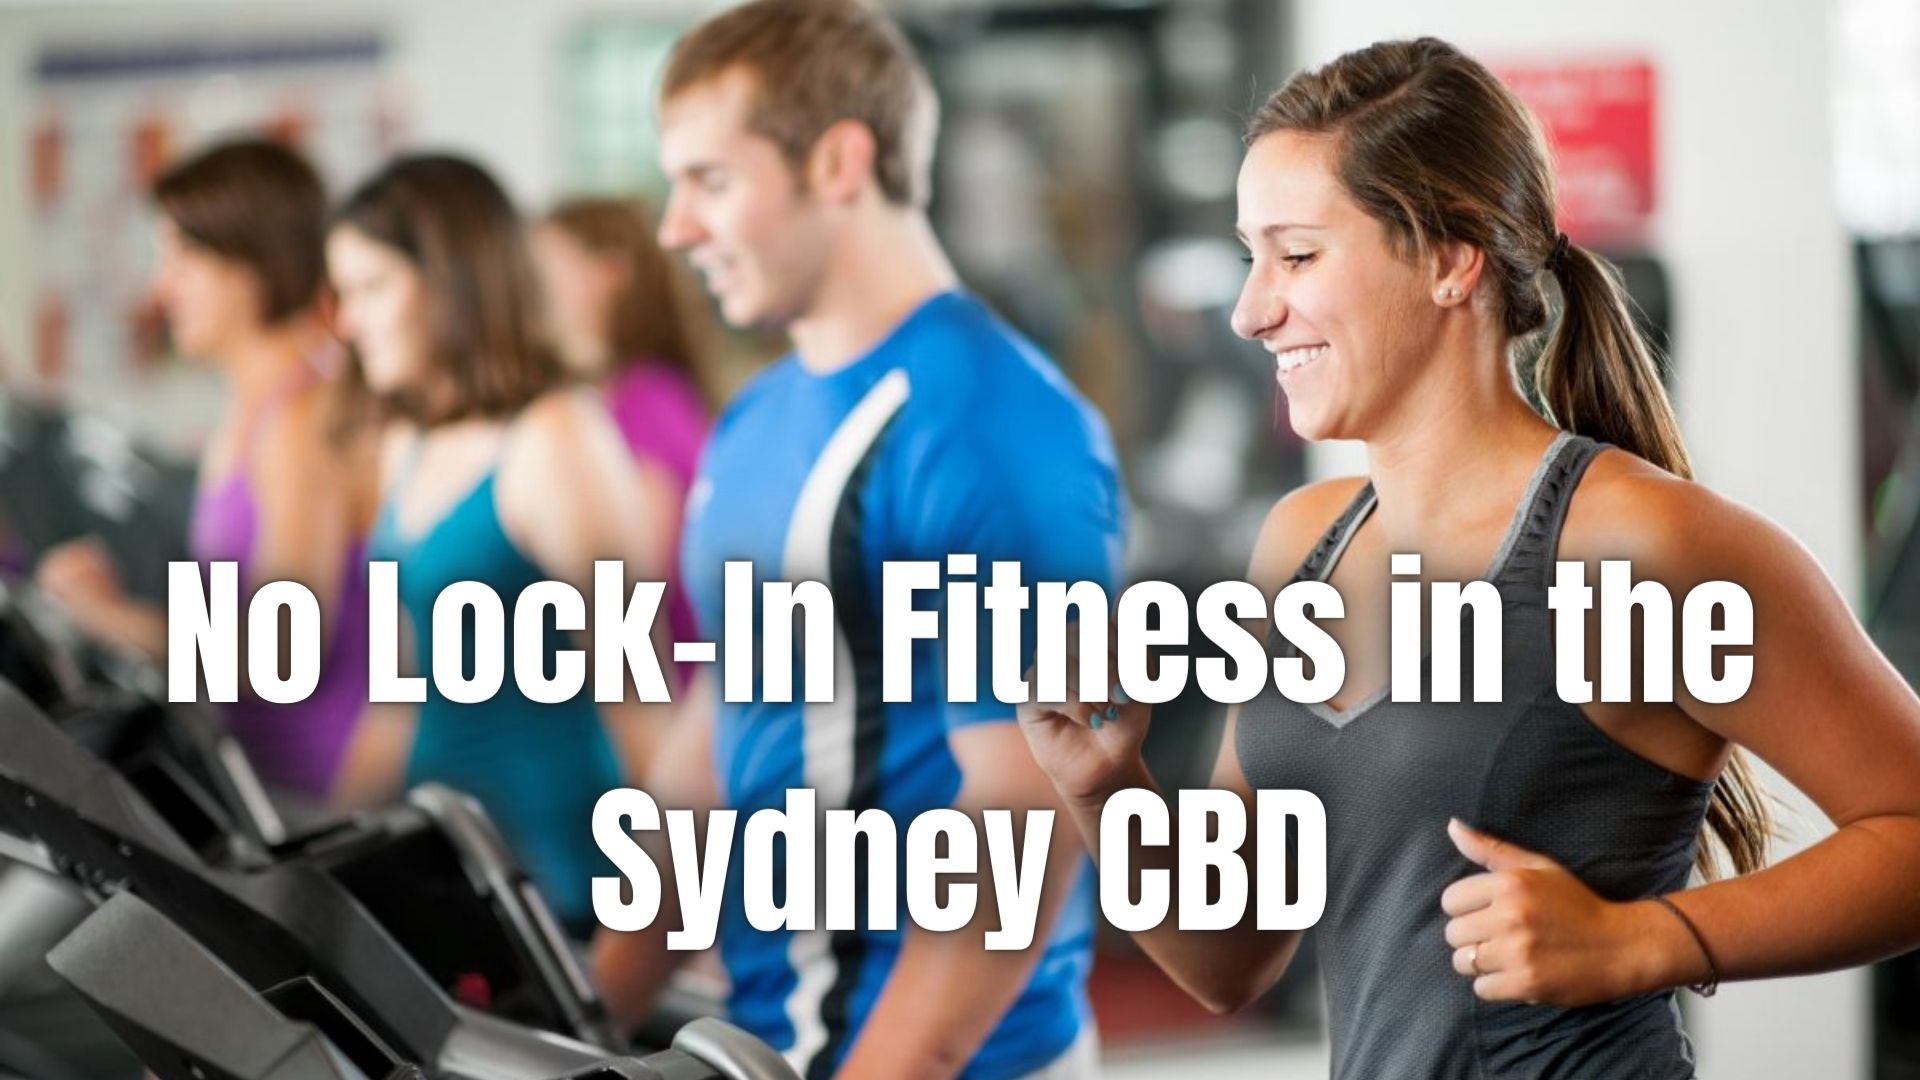 No Gym Commitment Needed! Find no lock-in fitness gyms in Sydney CBD. Train on your terms, and achieve your goals.